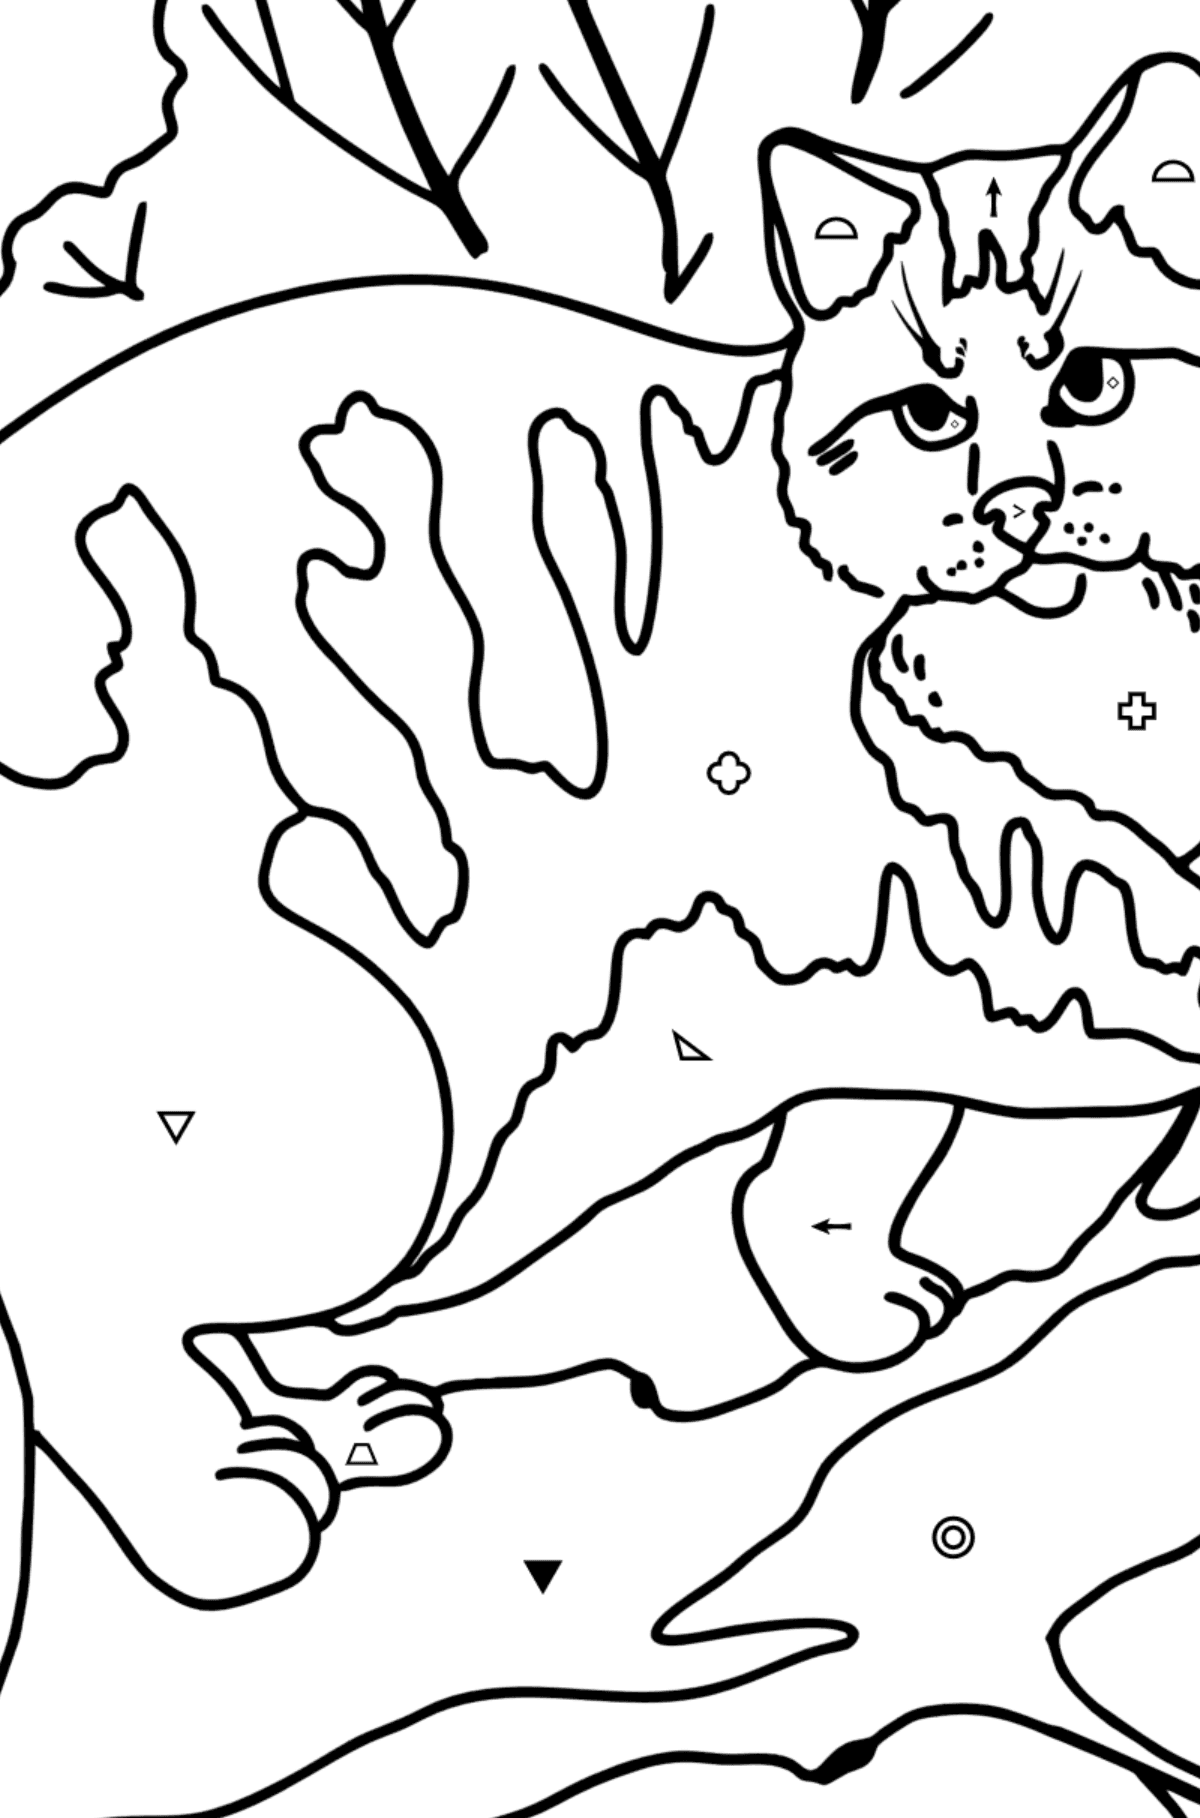 Wild Forest Cat coloring page - Coloring by Symbols and Geometric Shapes for Kids